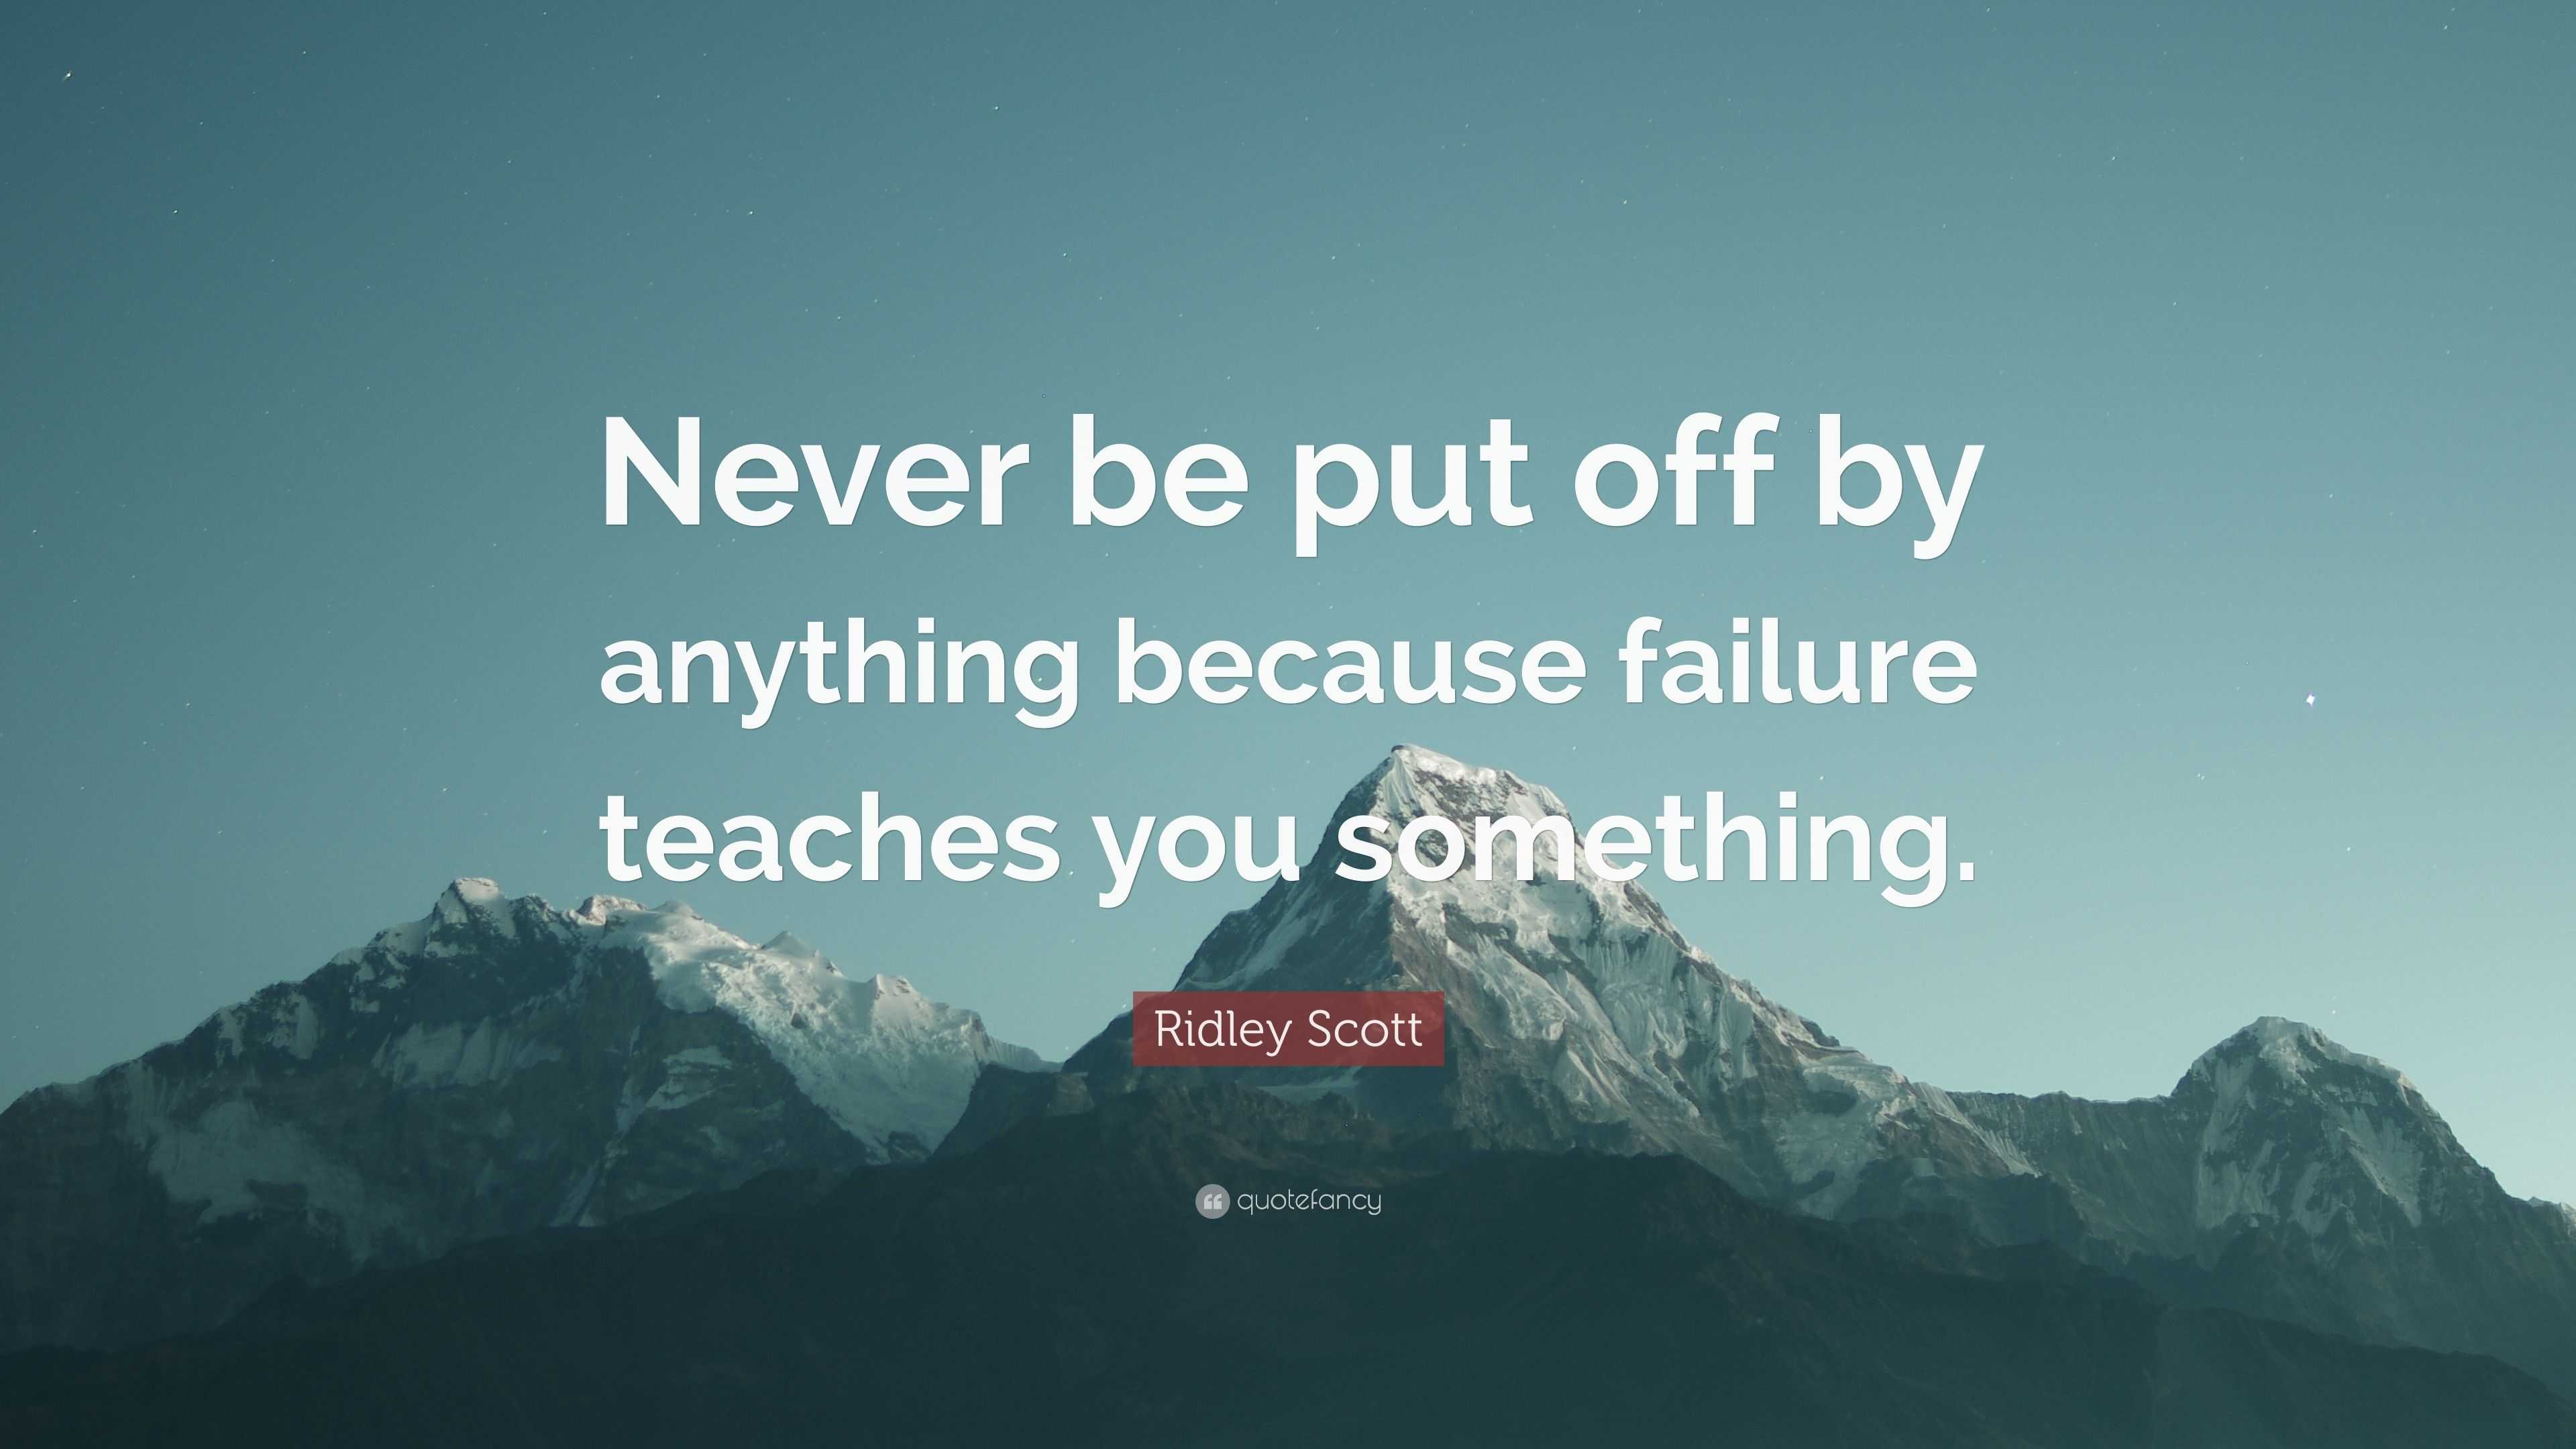 Ridley Scott Quote: “Never be put off by anything because failure